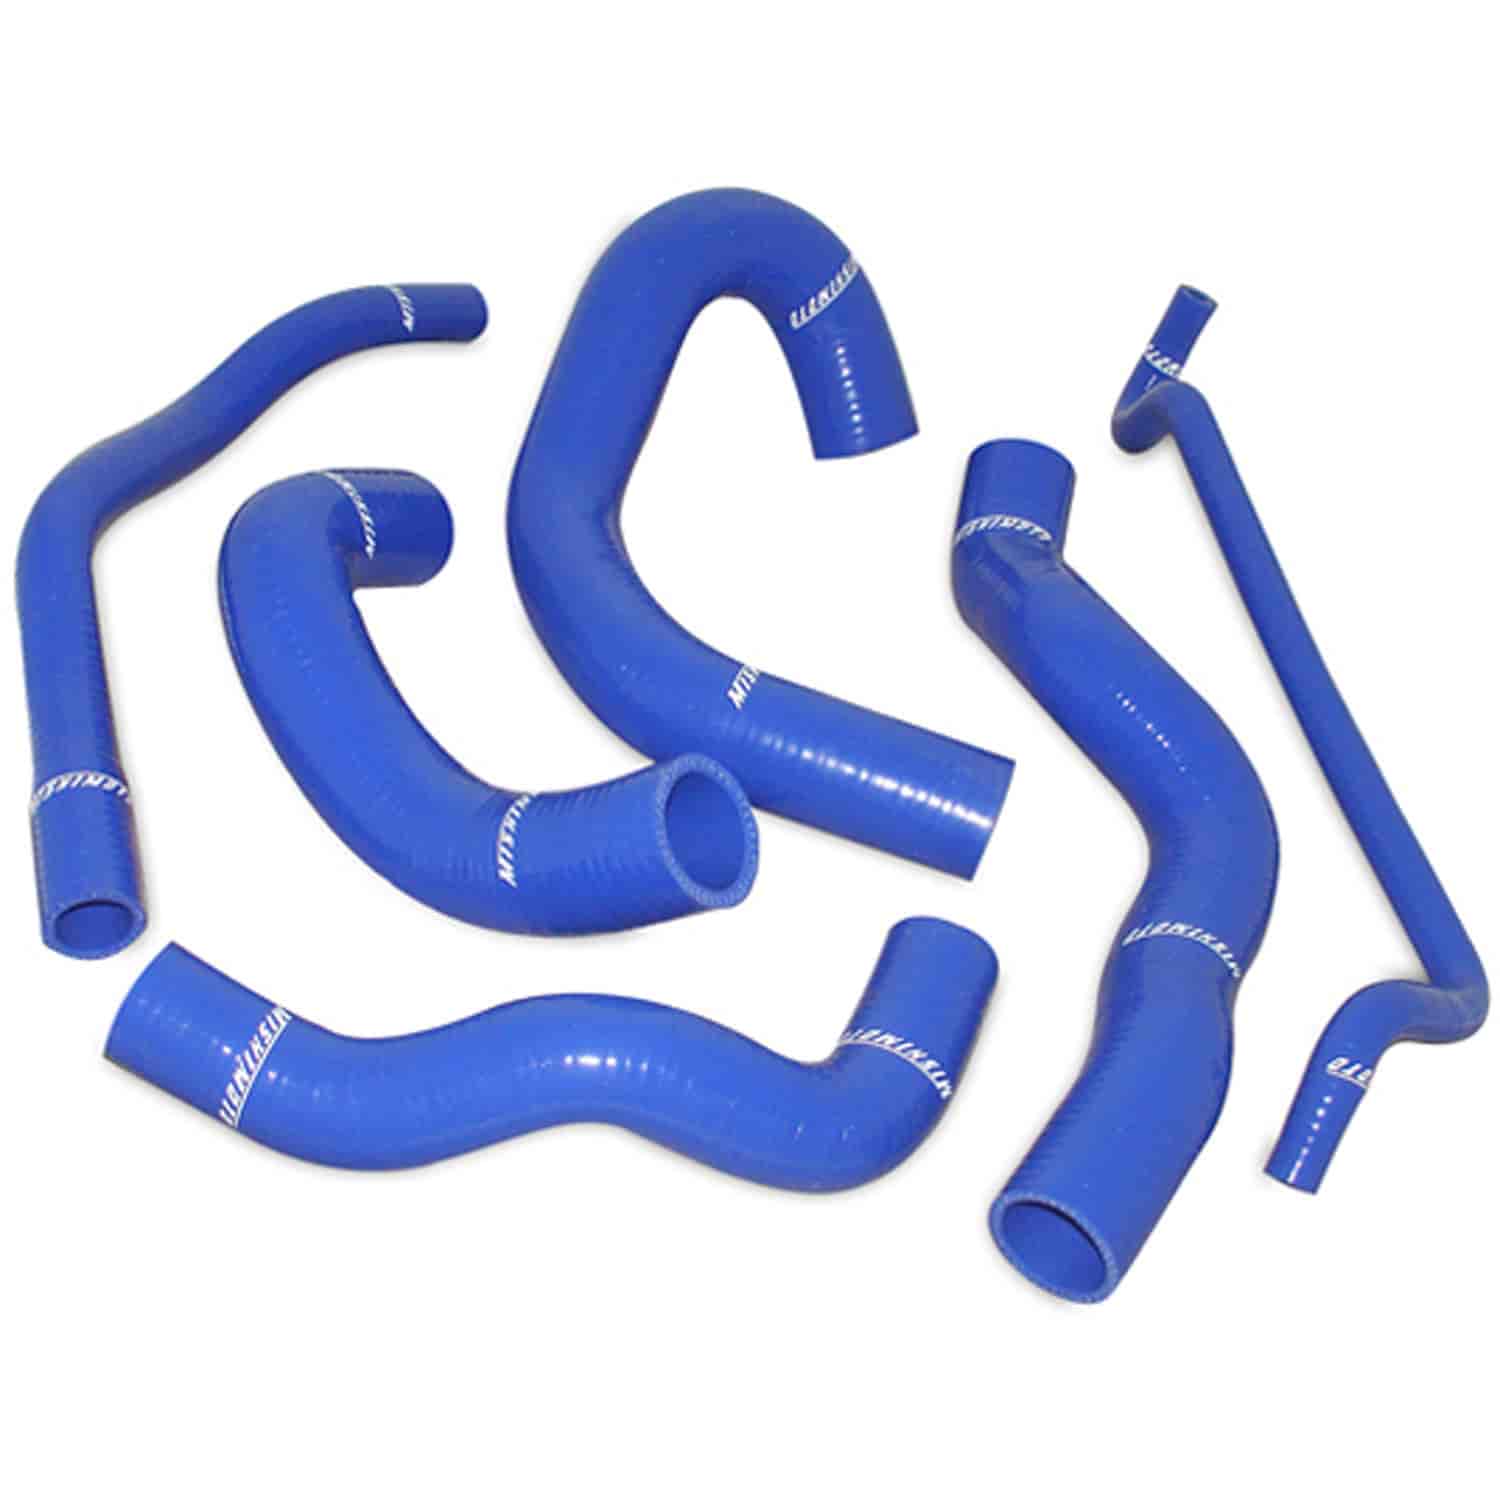 Silicone Coolant Hose Kit 2005-2006 Mustang V8